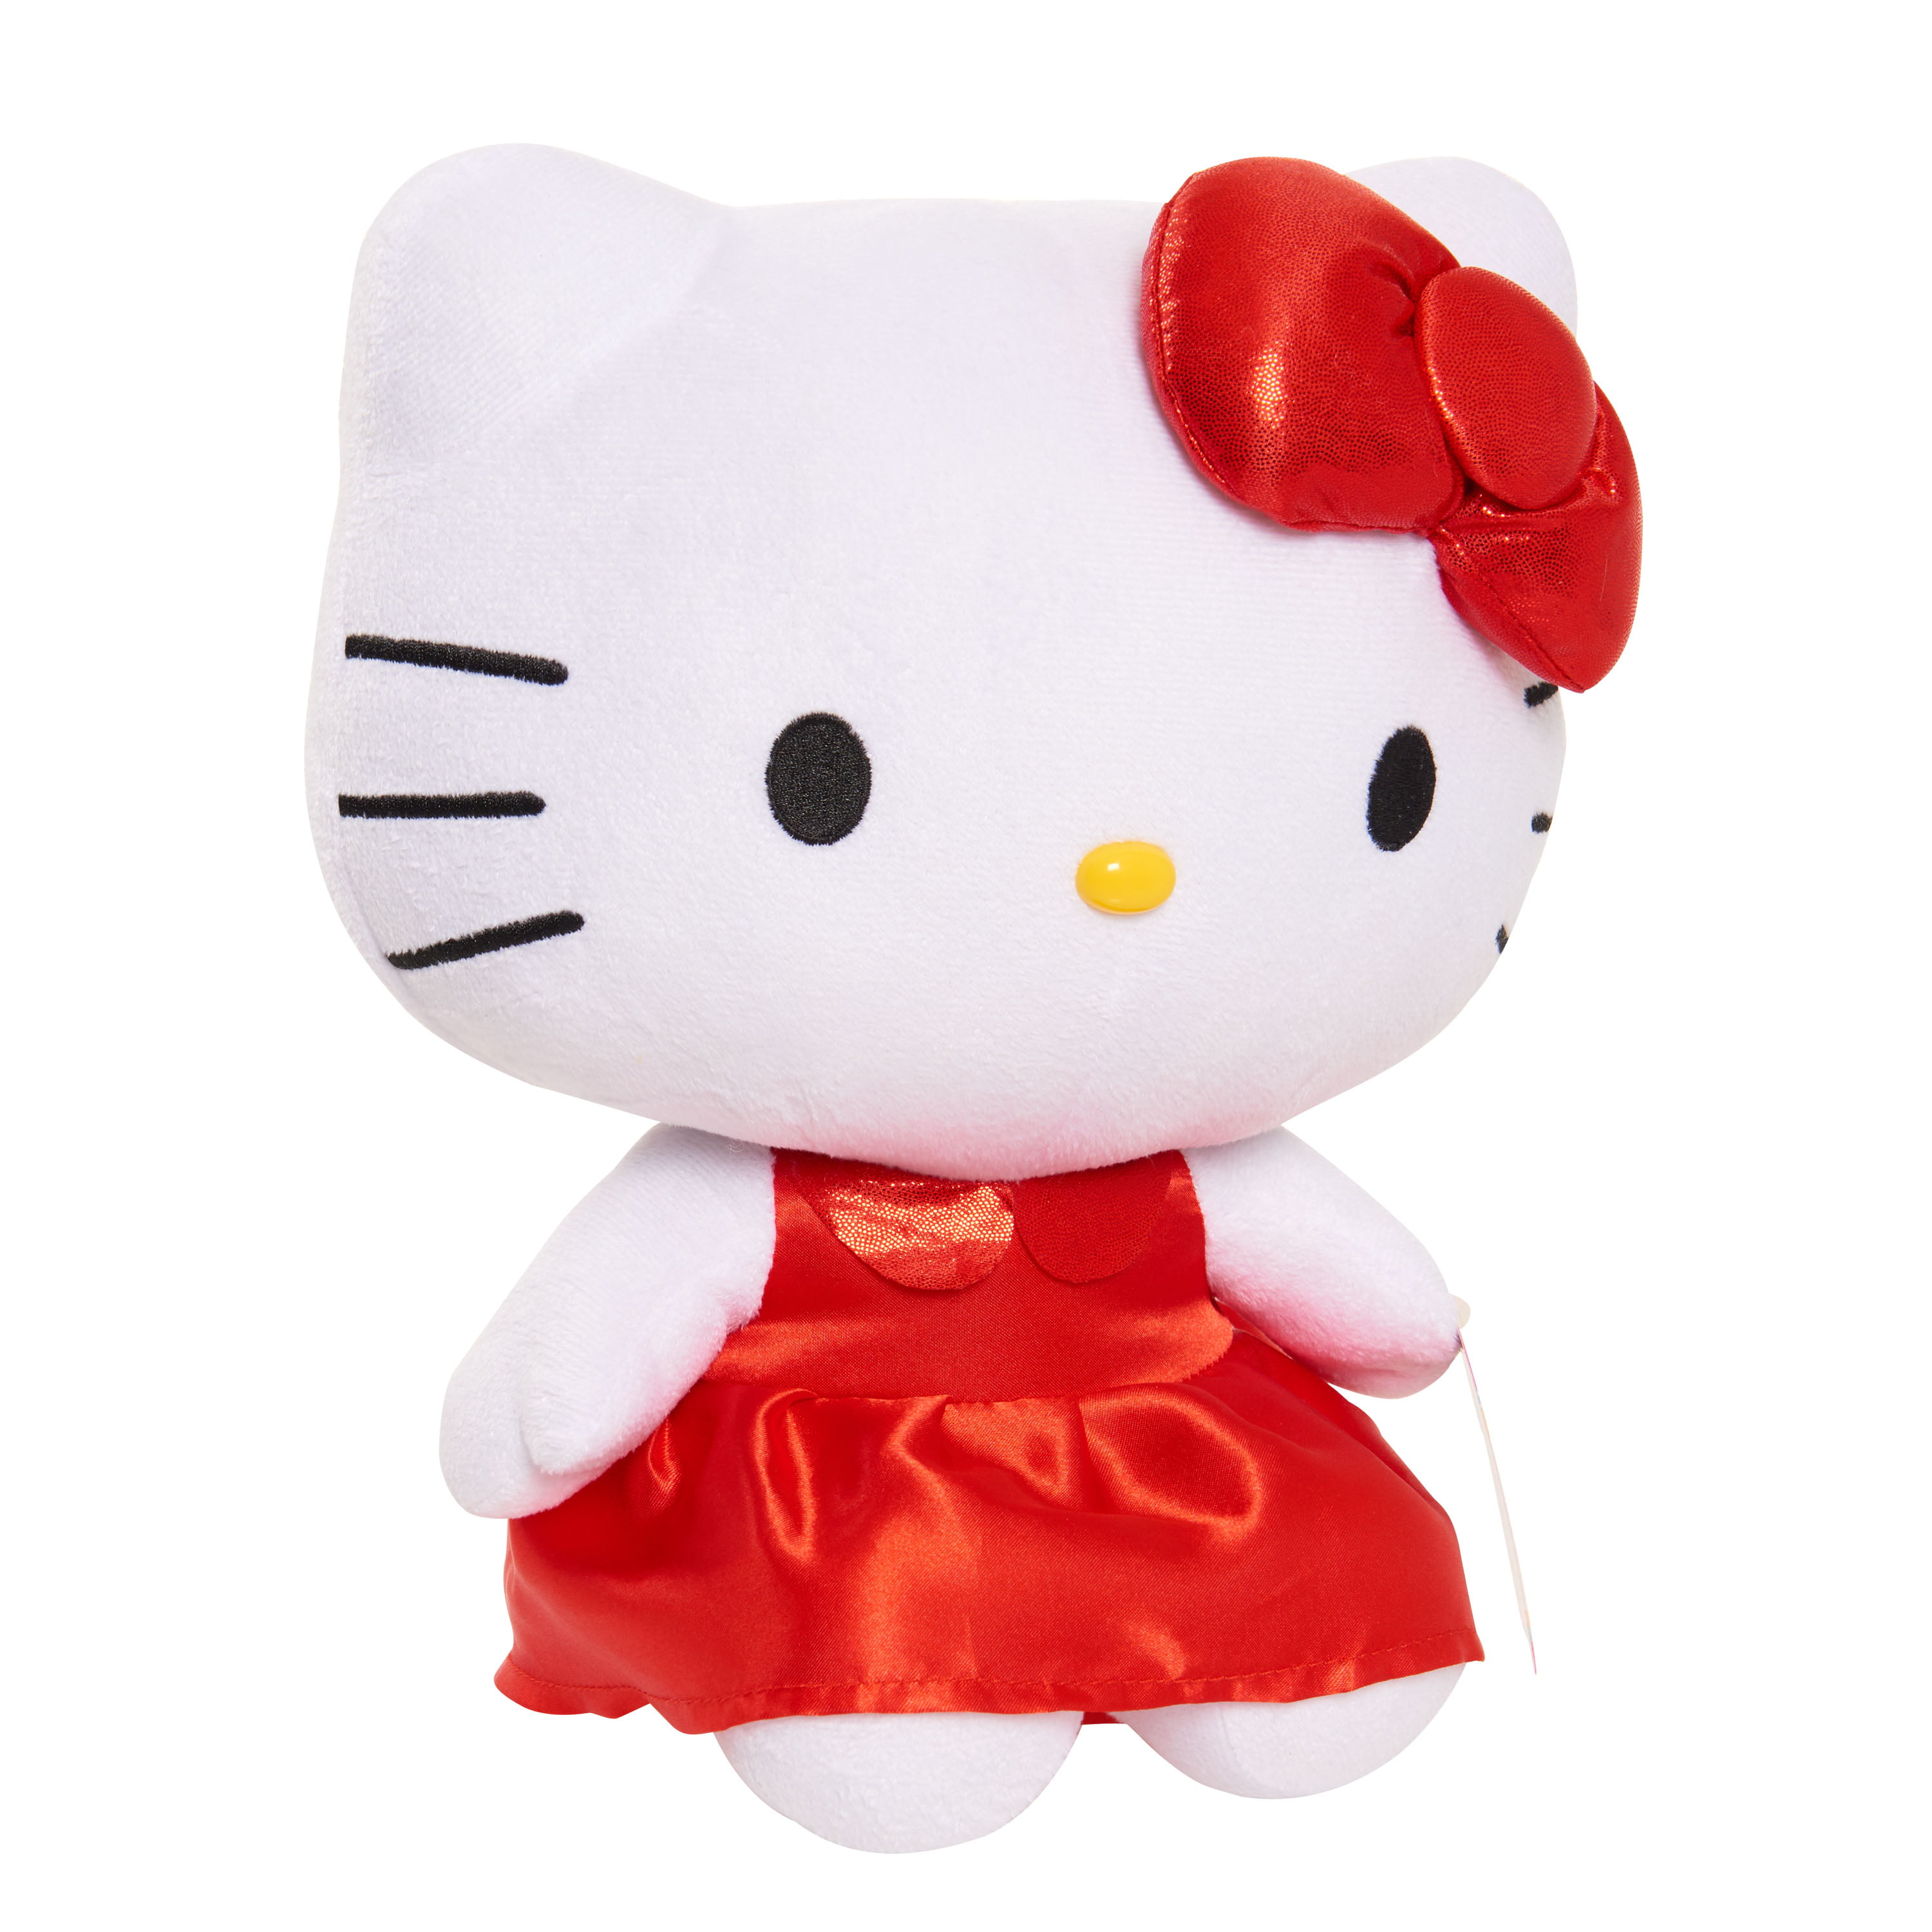 kitty doll online shopping